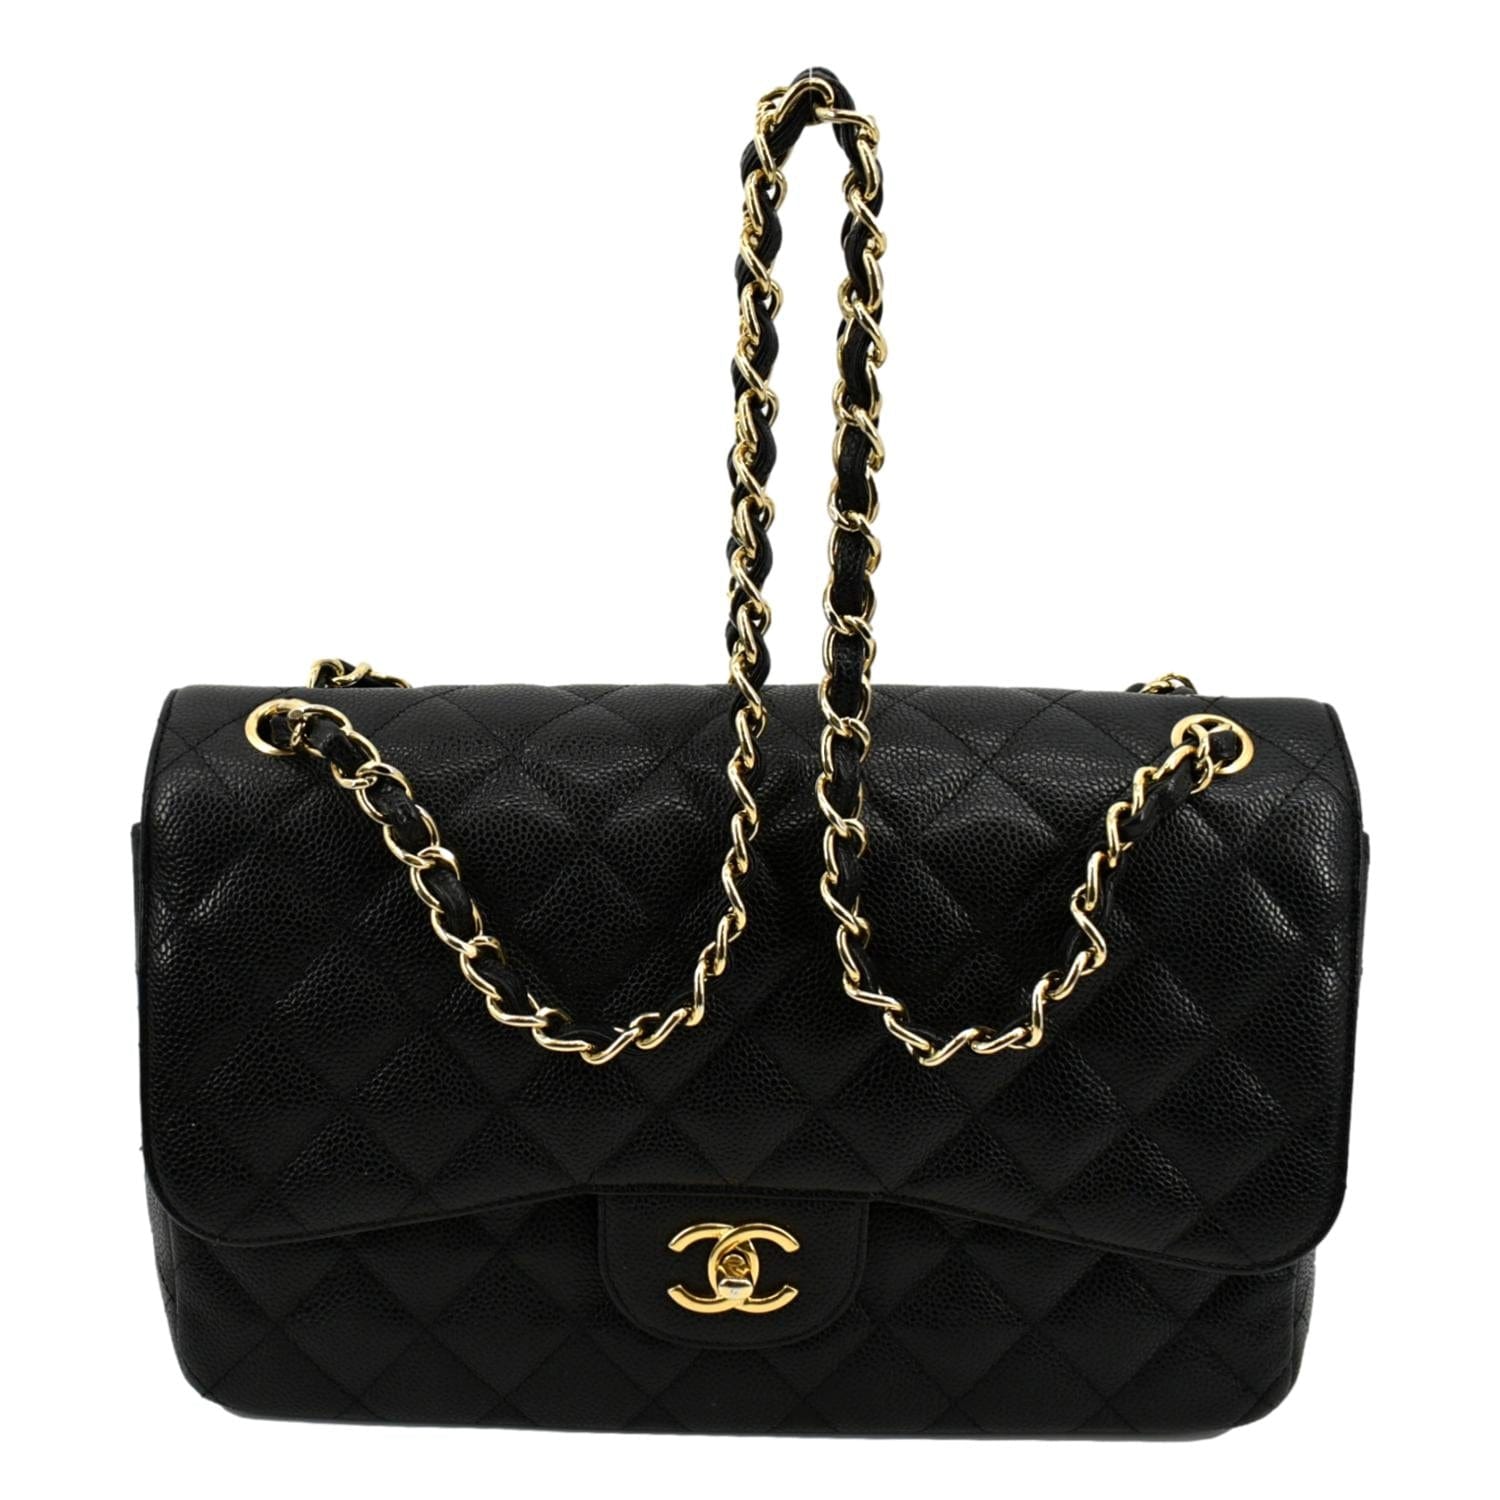 Chanel Timeless Classic 255 Jumbo Flap Bag in Black Caviar with Gold  Hardware  SOLD  Chanel çantalar Kadın el çantaları Chanel el çantaları